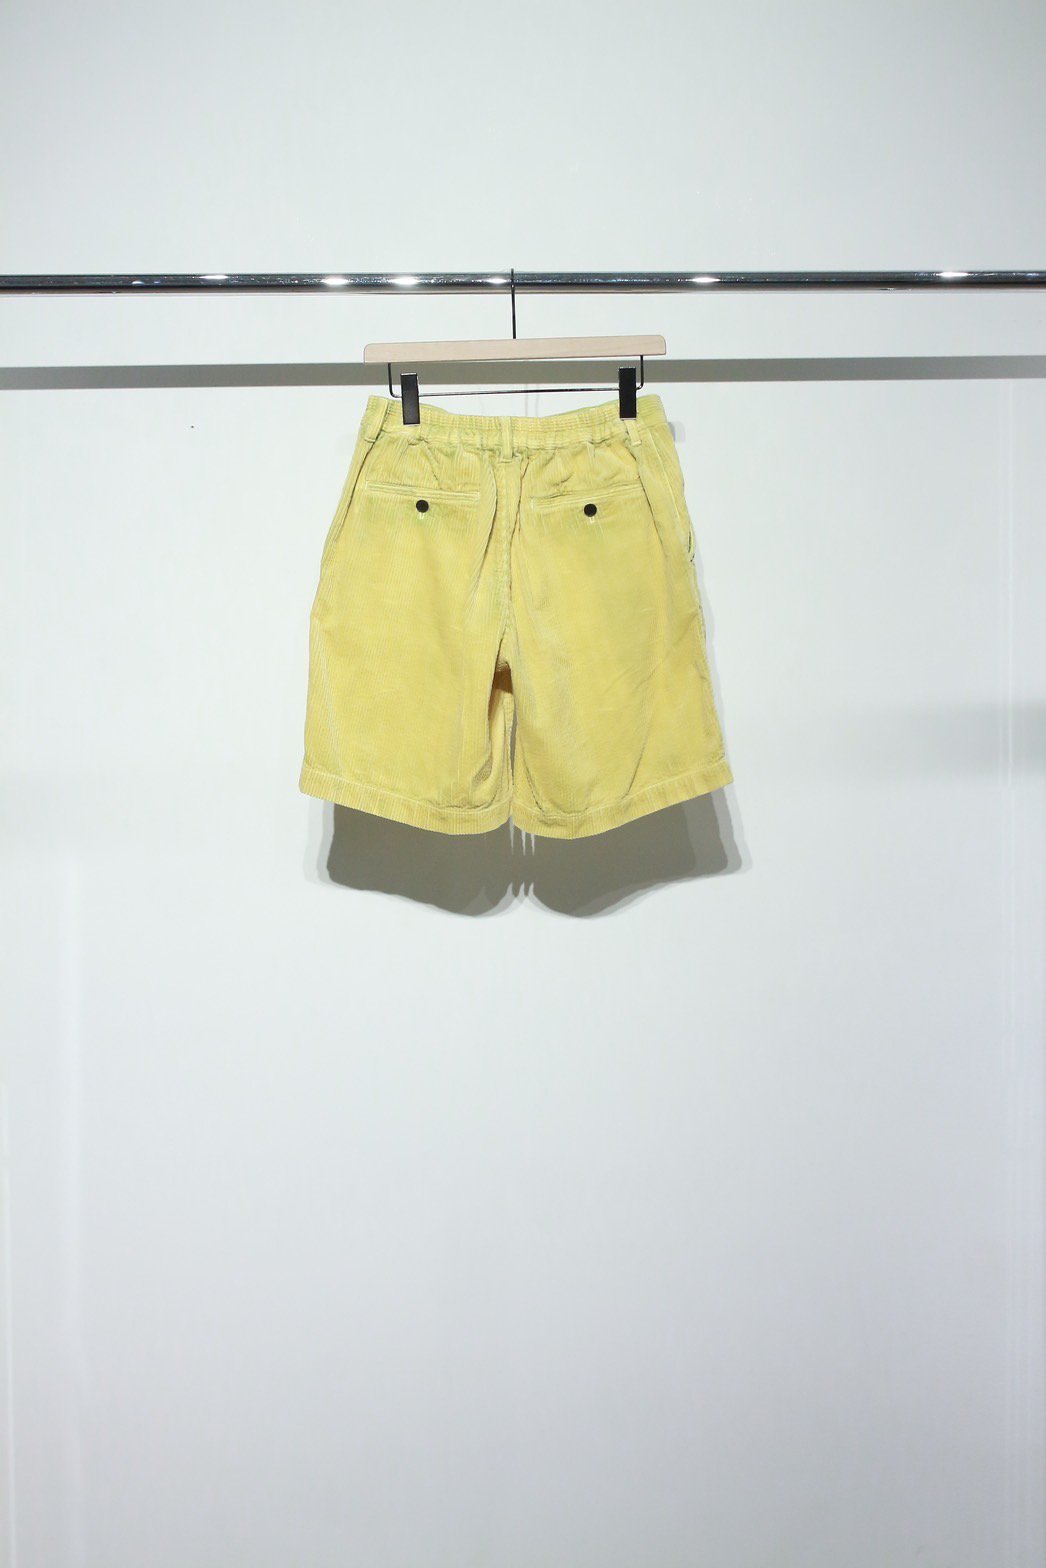 soe<br />Overdyed Corduroy Shorts / YELLOW<img class='new_mark_img2' src='https://img.shop-pro.jp/img/new/icons47.gif' style='border:none;display:inline;margin:0px;padding:0px;width:auto;' />